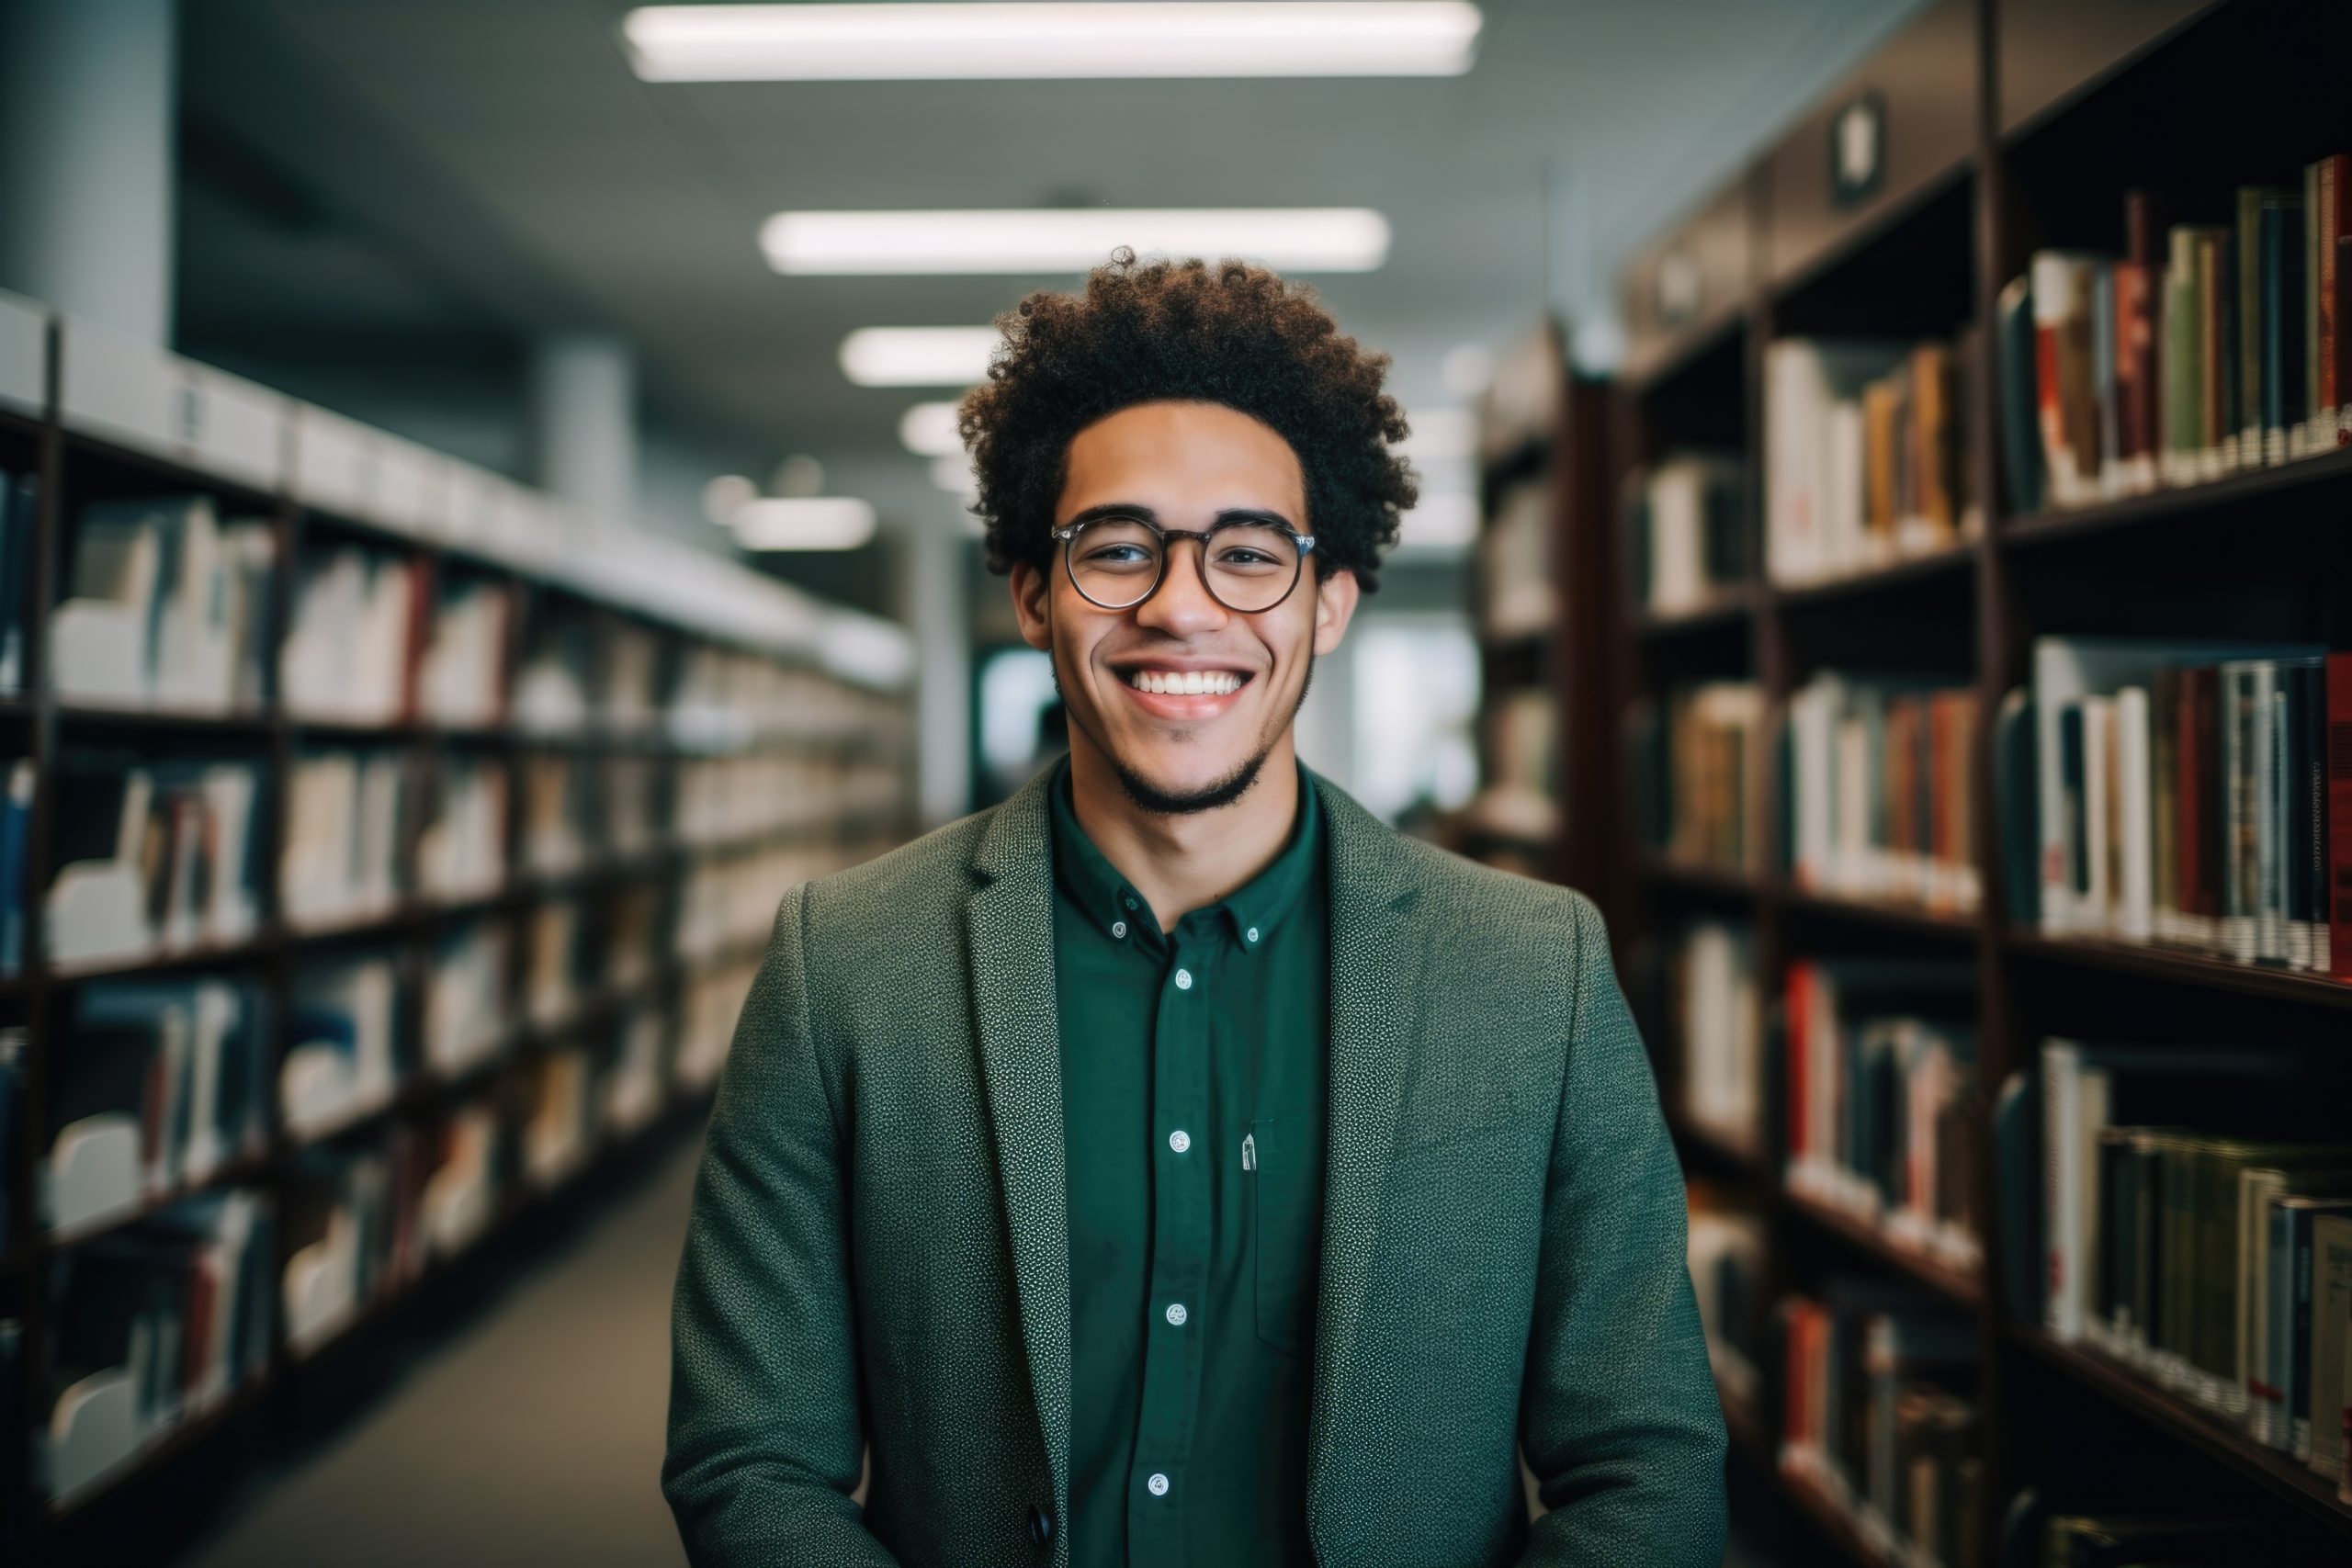 Portrait of a young student in a library.